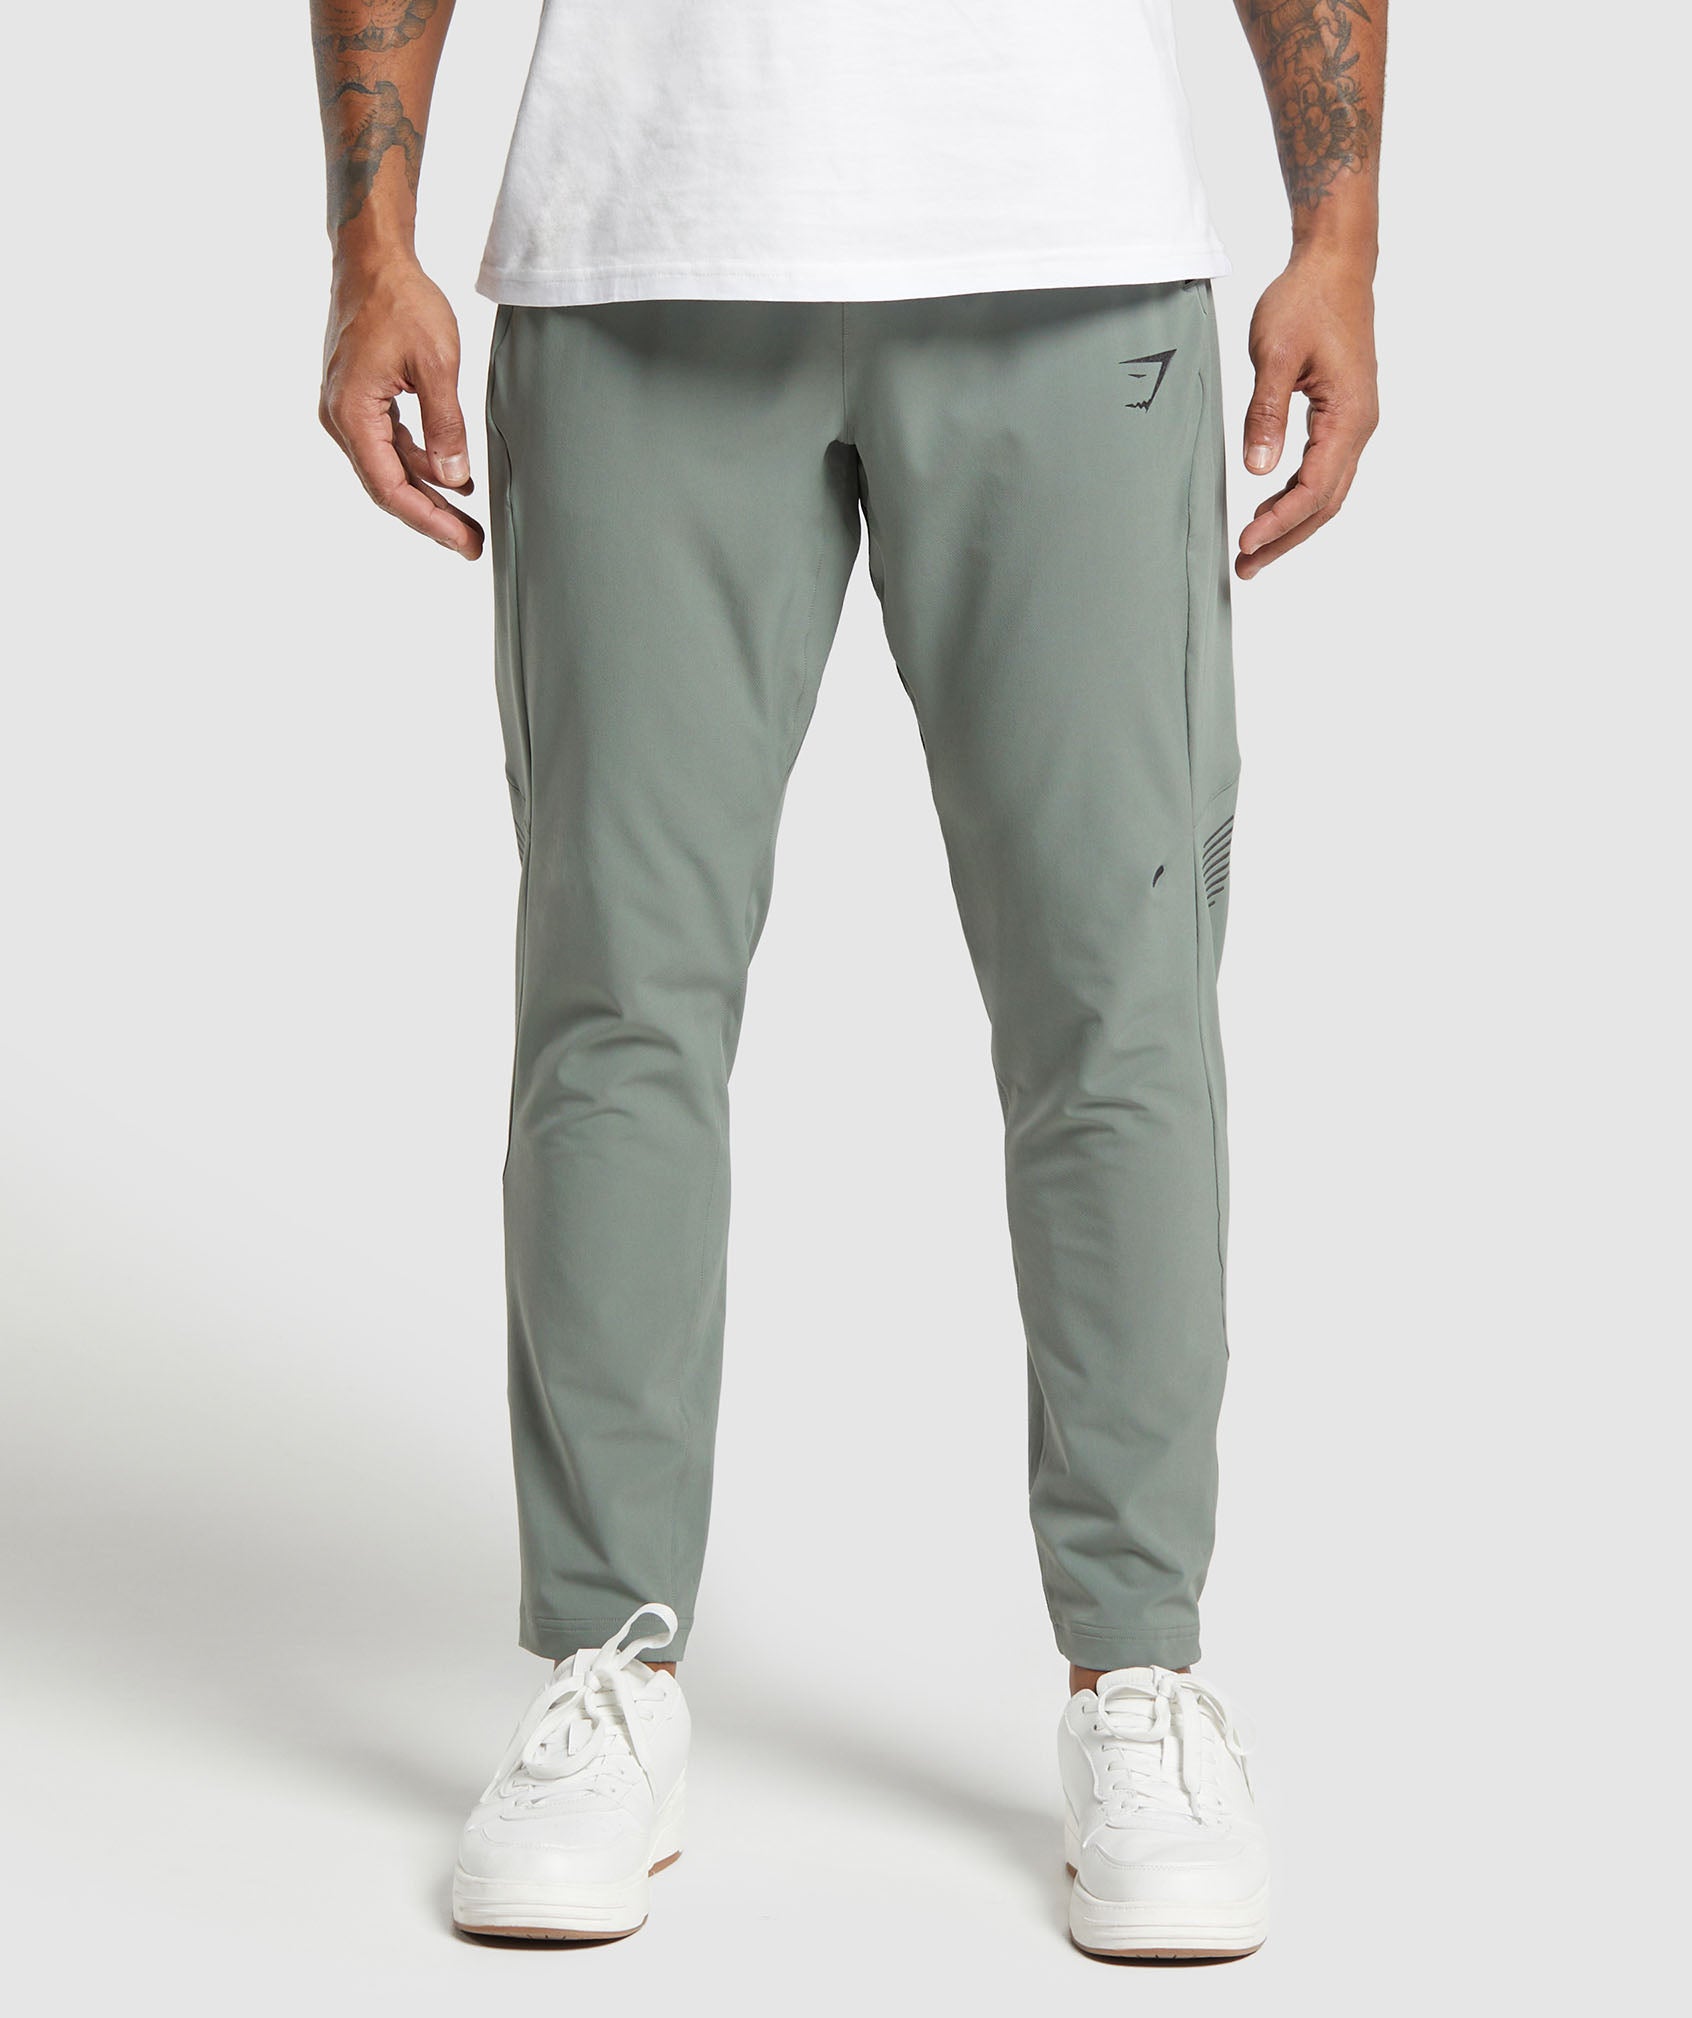 Apex Jogger in Unit Green - view 2